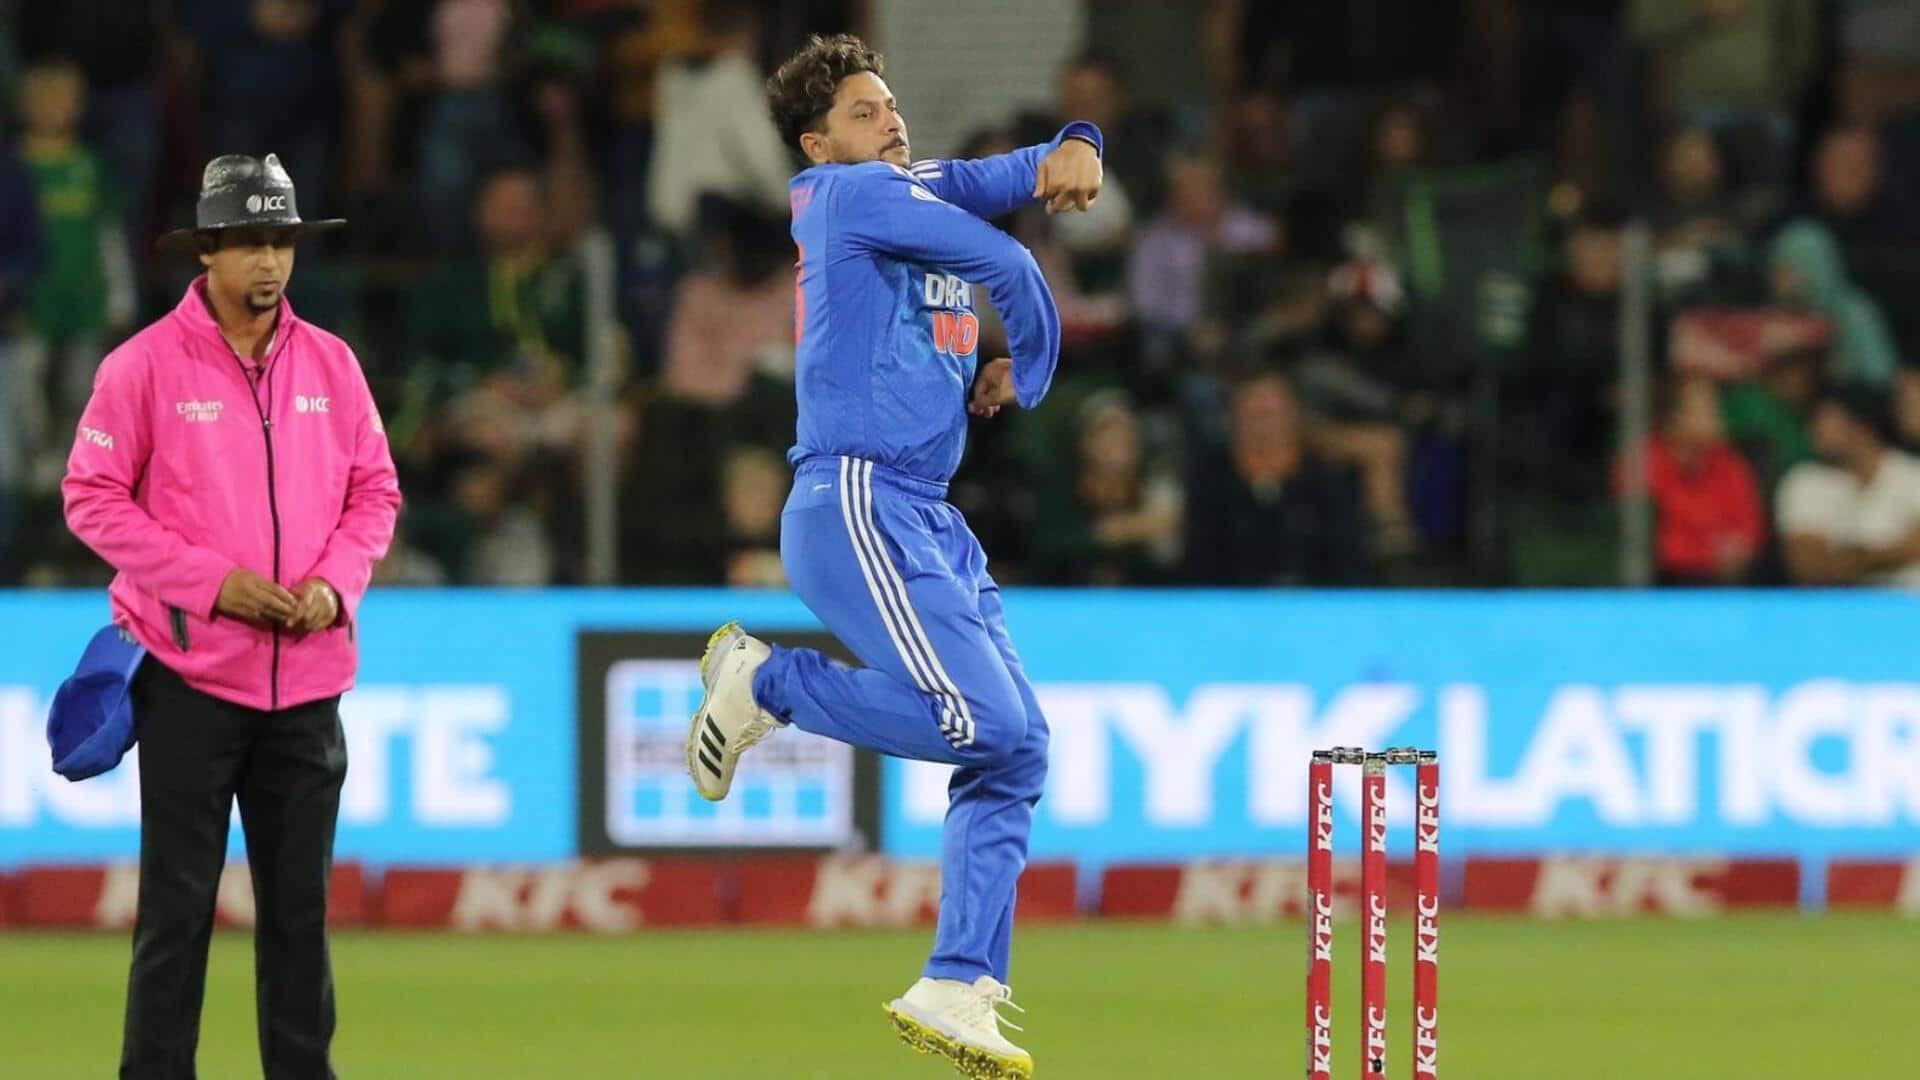 Kuldeep Yadav claims his second five-wicket haul in T20Is: Stats